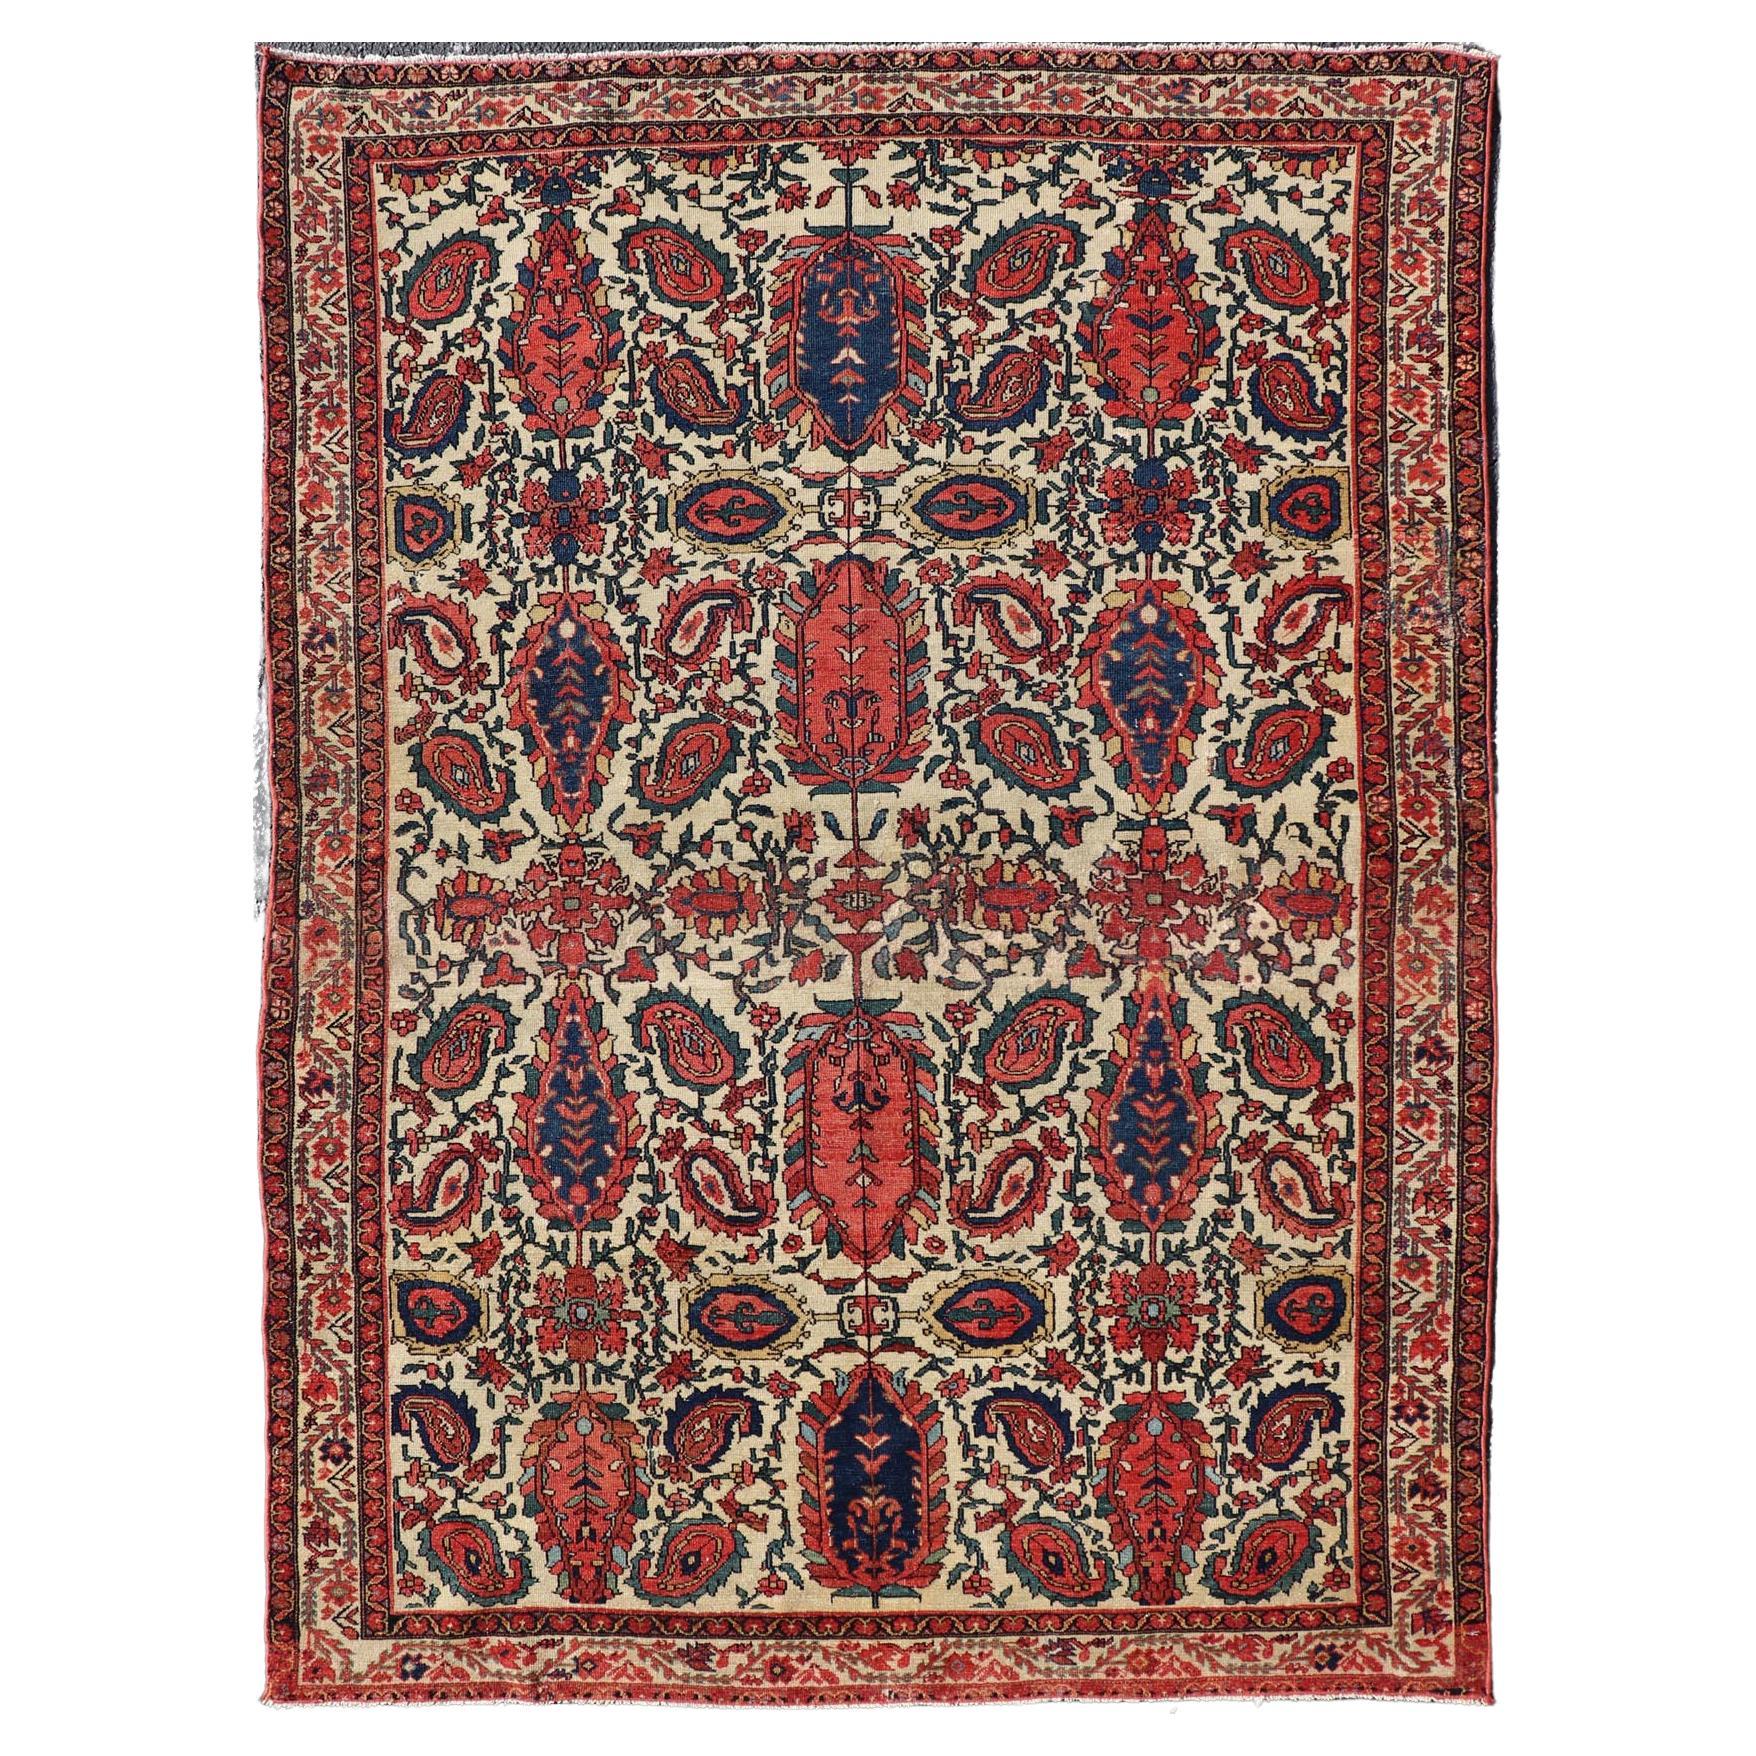 Antique Persian Fine Sanneh Malayer Rug with All-Over Design in Ivory, Red, Blue